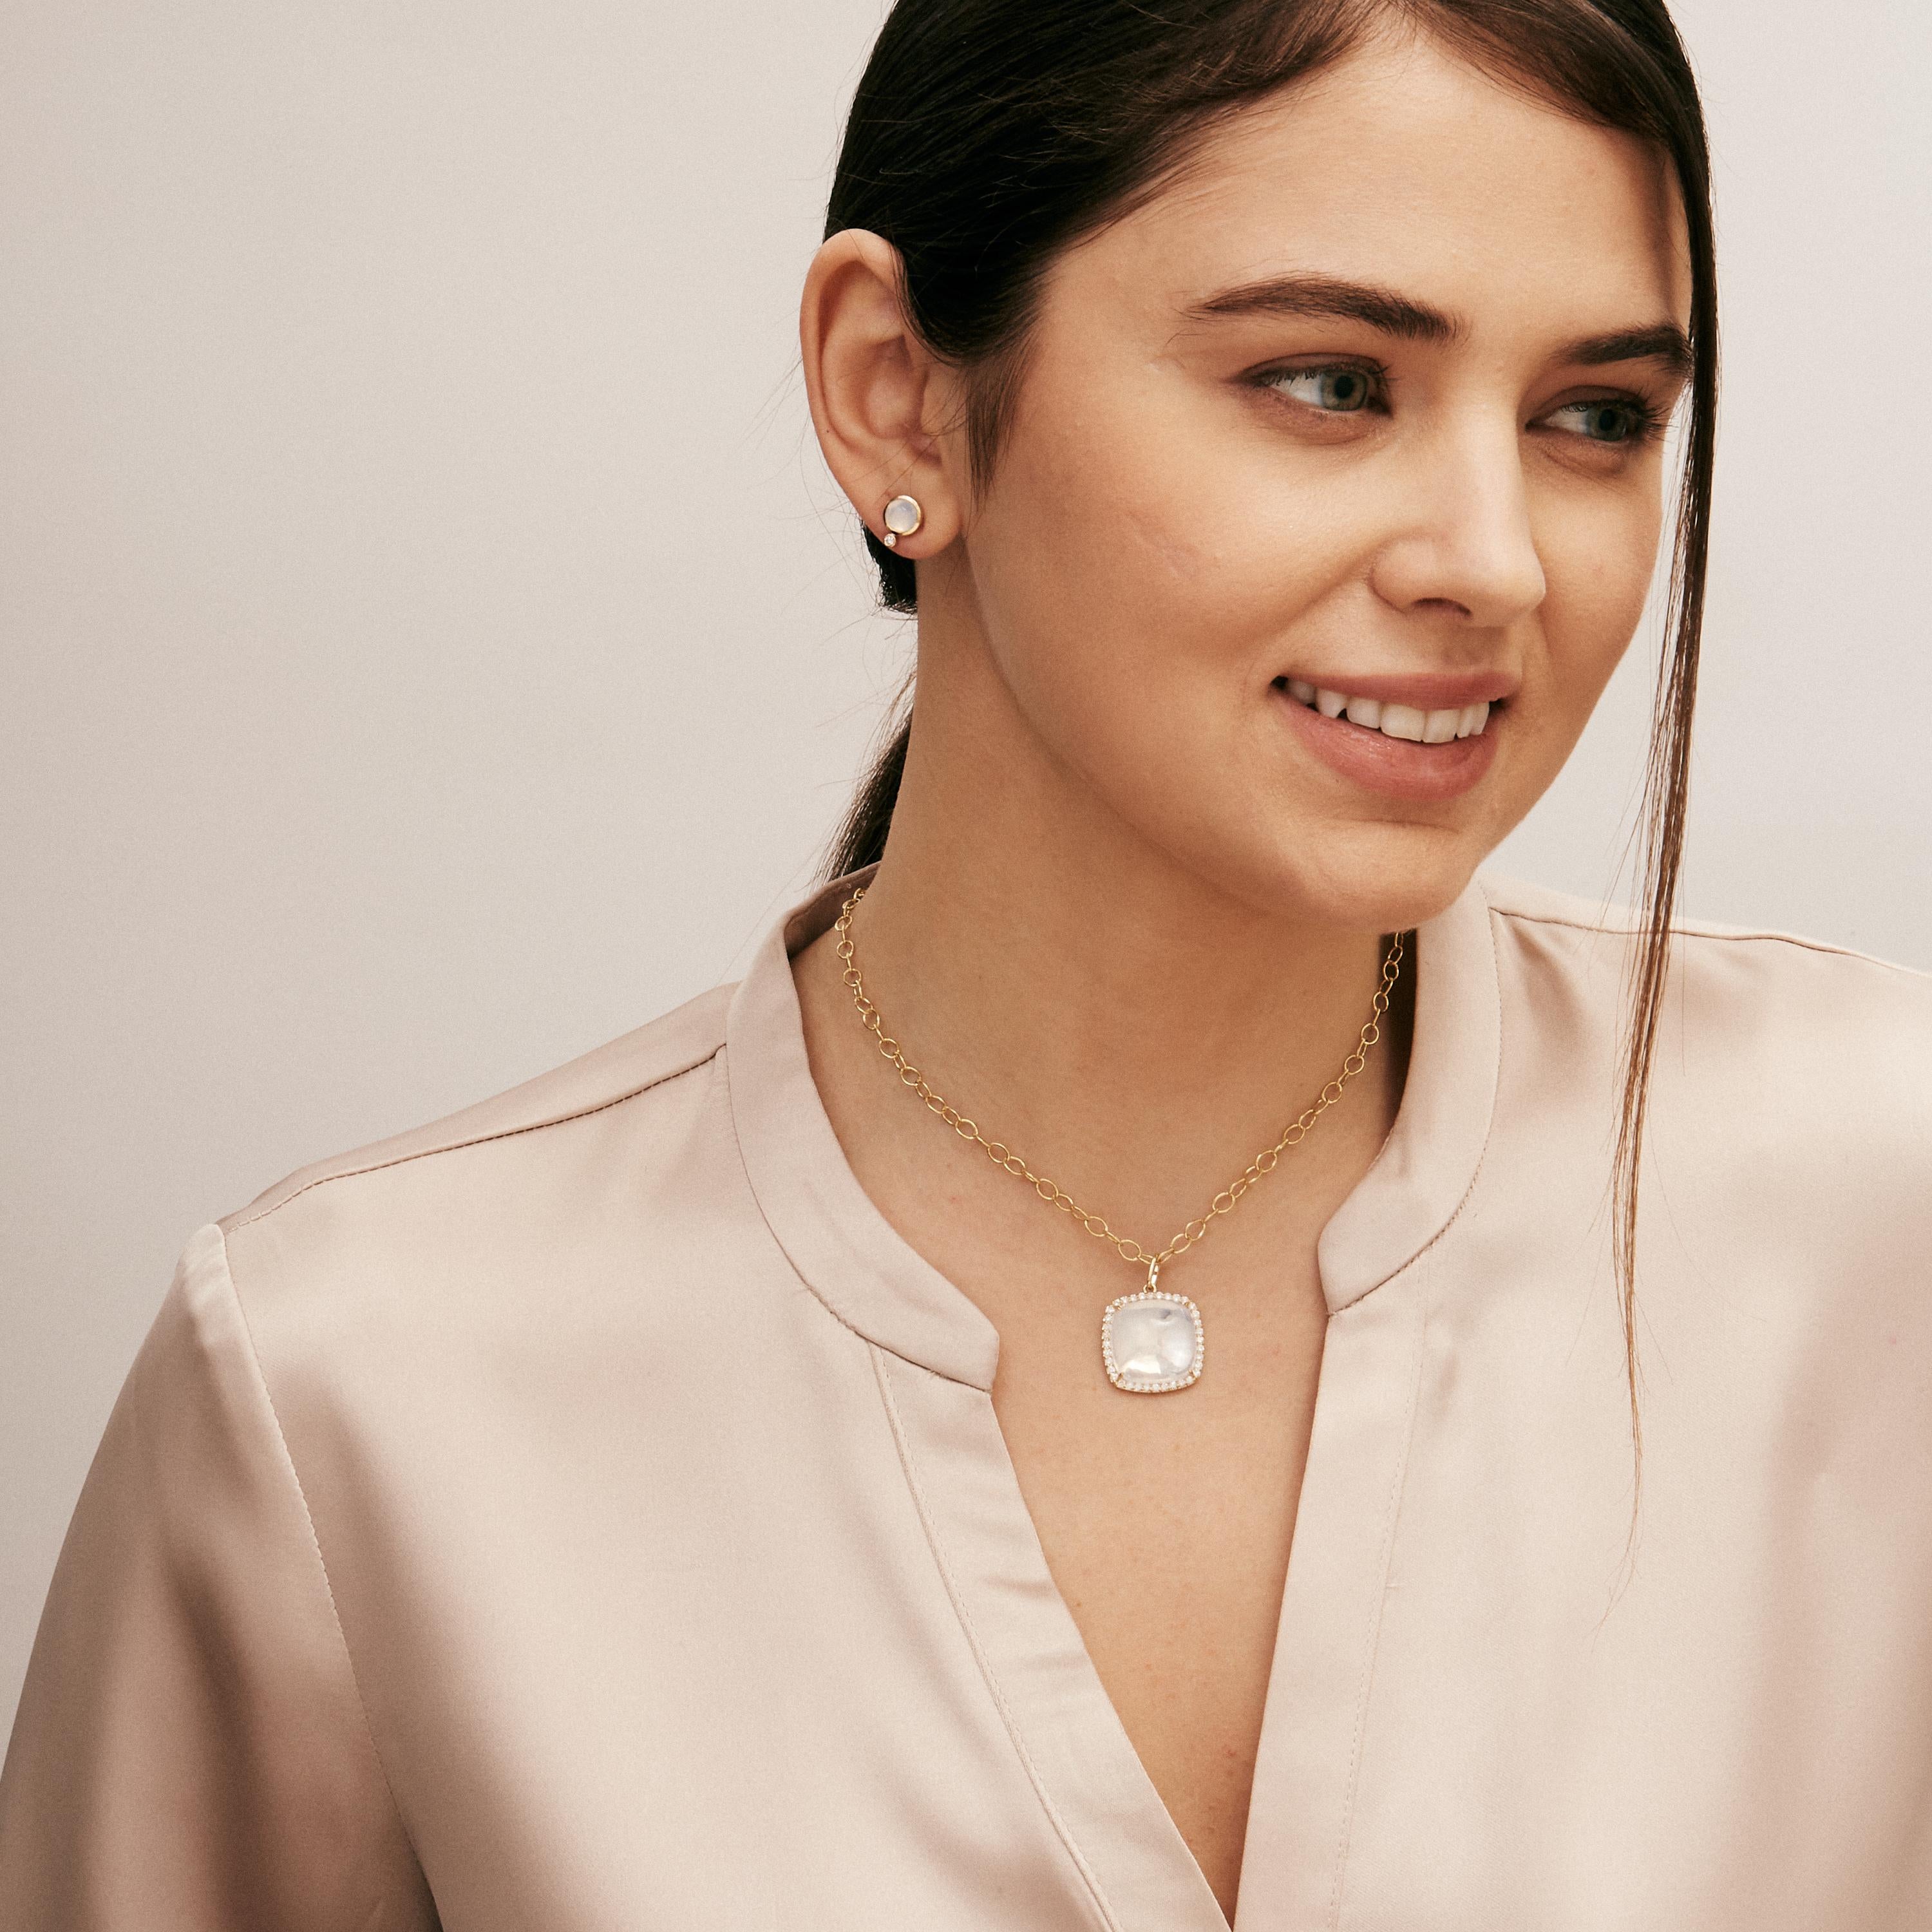 Created in 18 karat yellow gold
Moon quartz 15 carats approx.
Diamonds 0.55 carat approx.
Chain sold separately 
Limited edition

Exquisitely hand-crafted from rich 18 karat yellow gold, this limited edition Pendant features 15 carats of moon quartz